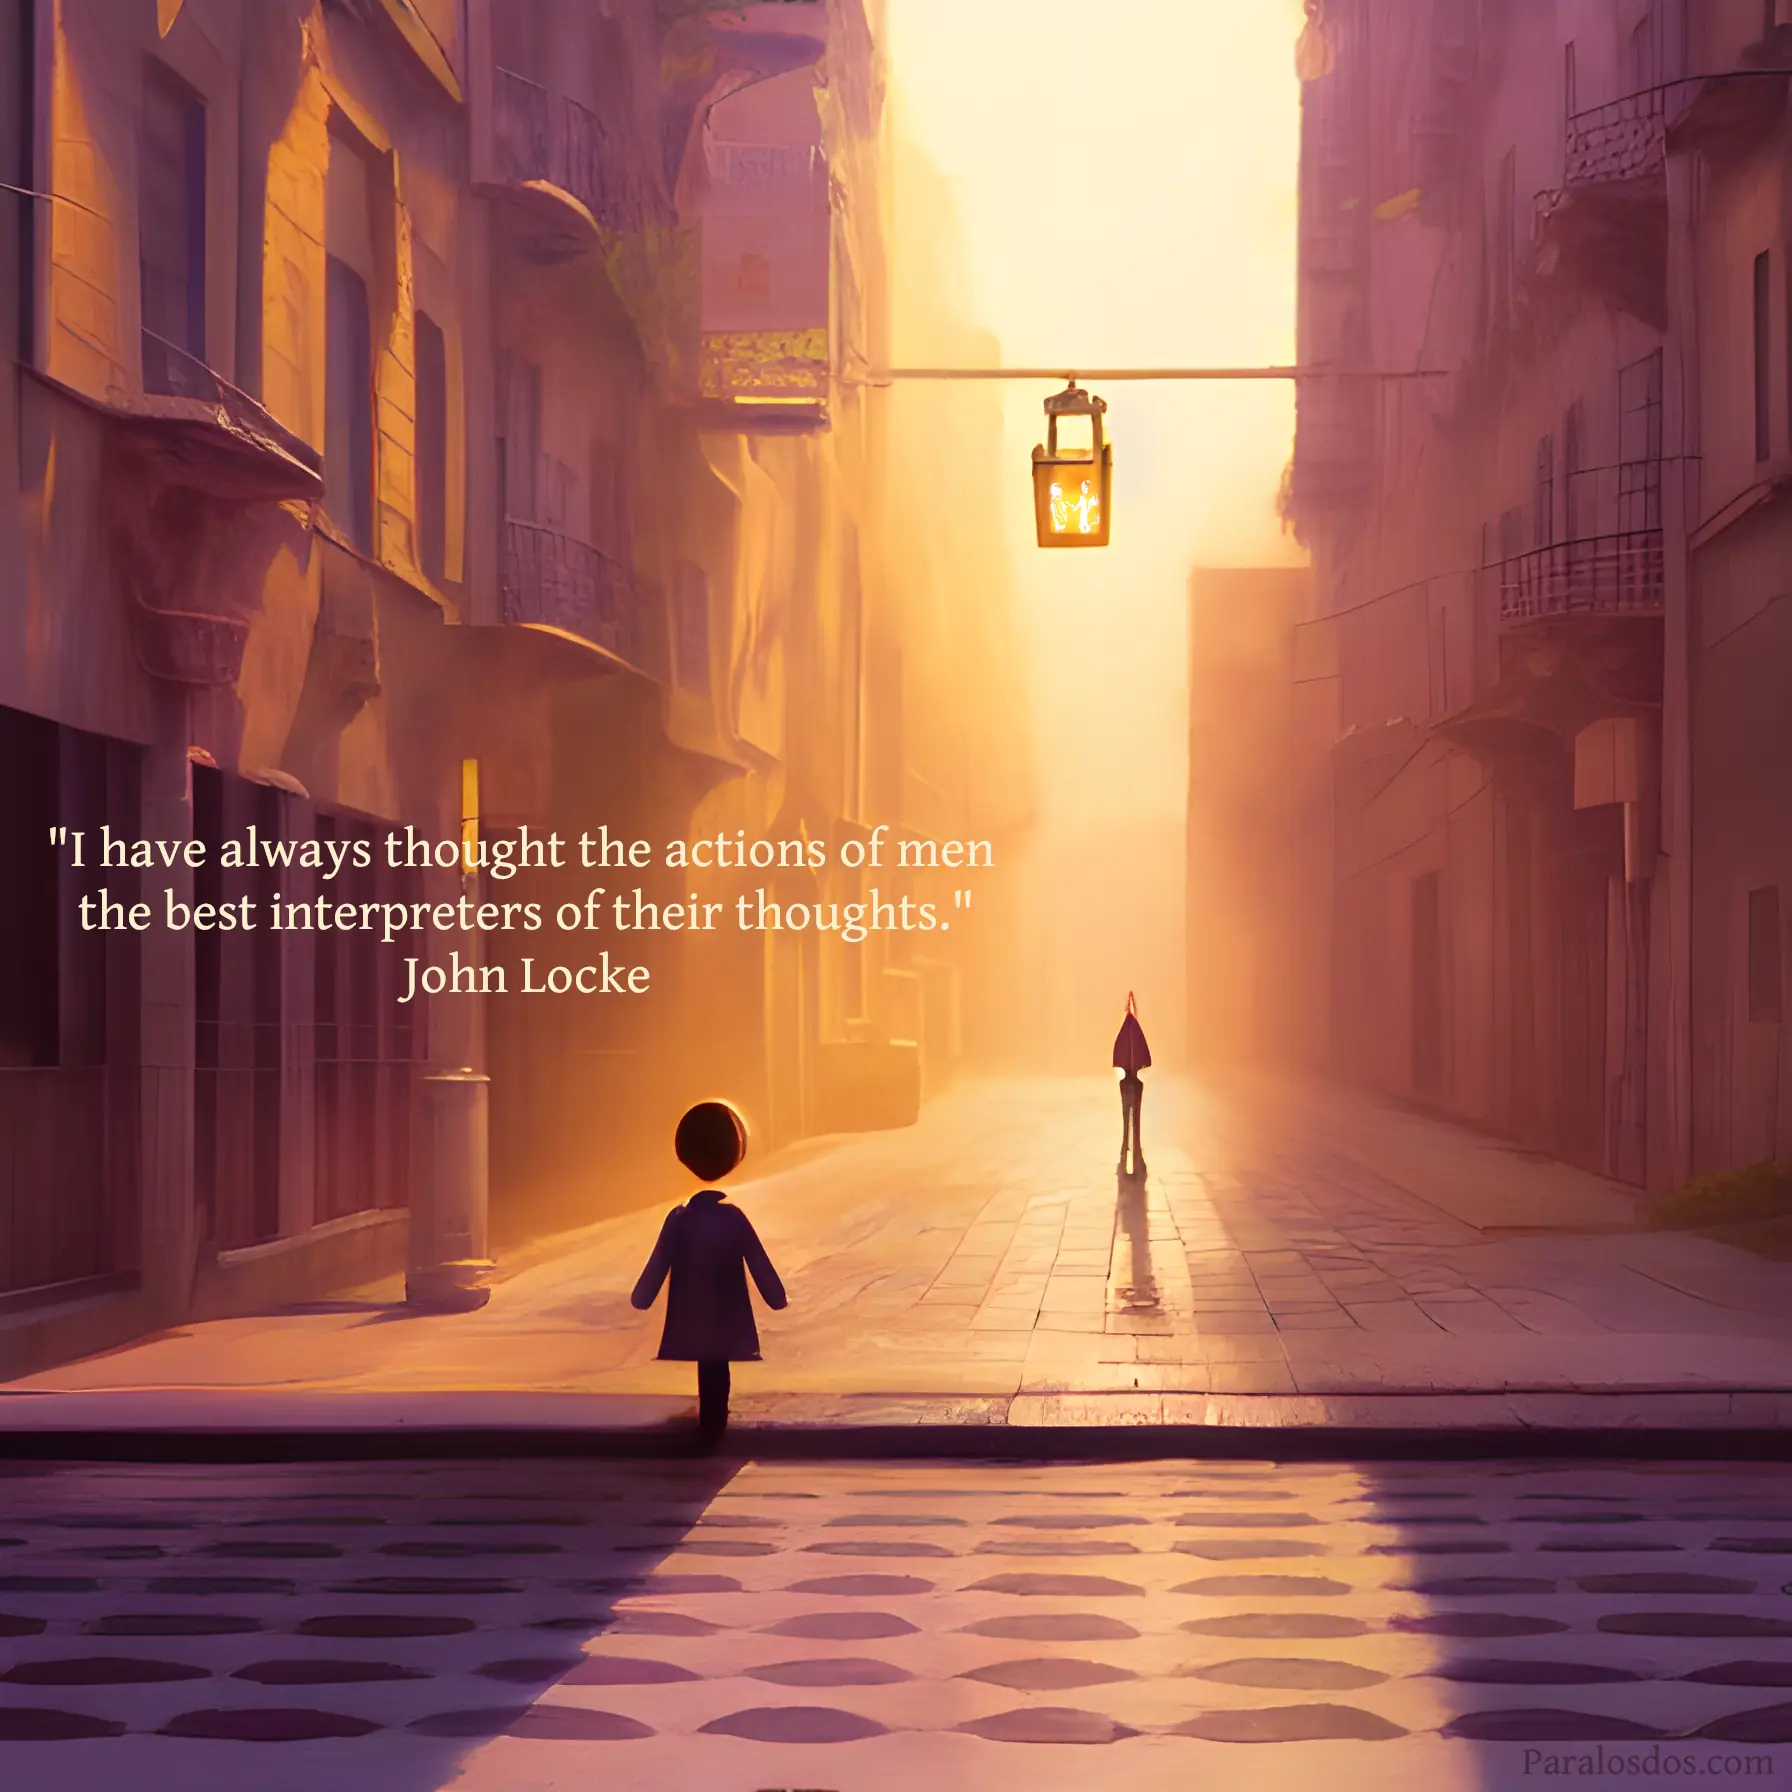 An artistic rendering of a lone figure walking down the middle of a street in a big city. The quote reads: "I have always thought the actions of men the best interpreters of their thoughts." John Locke